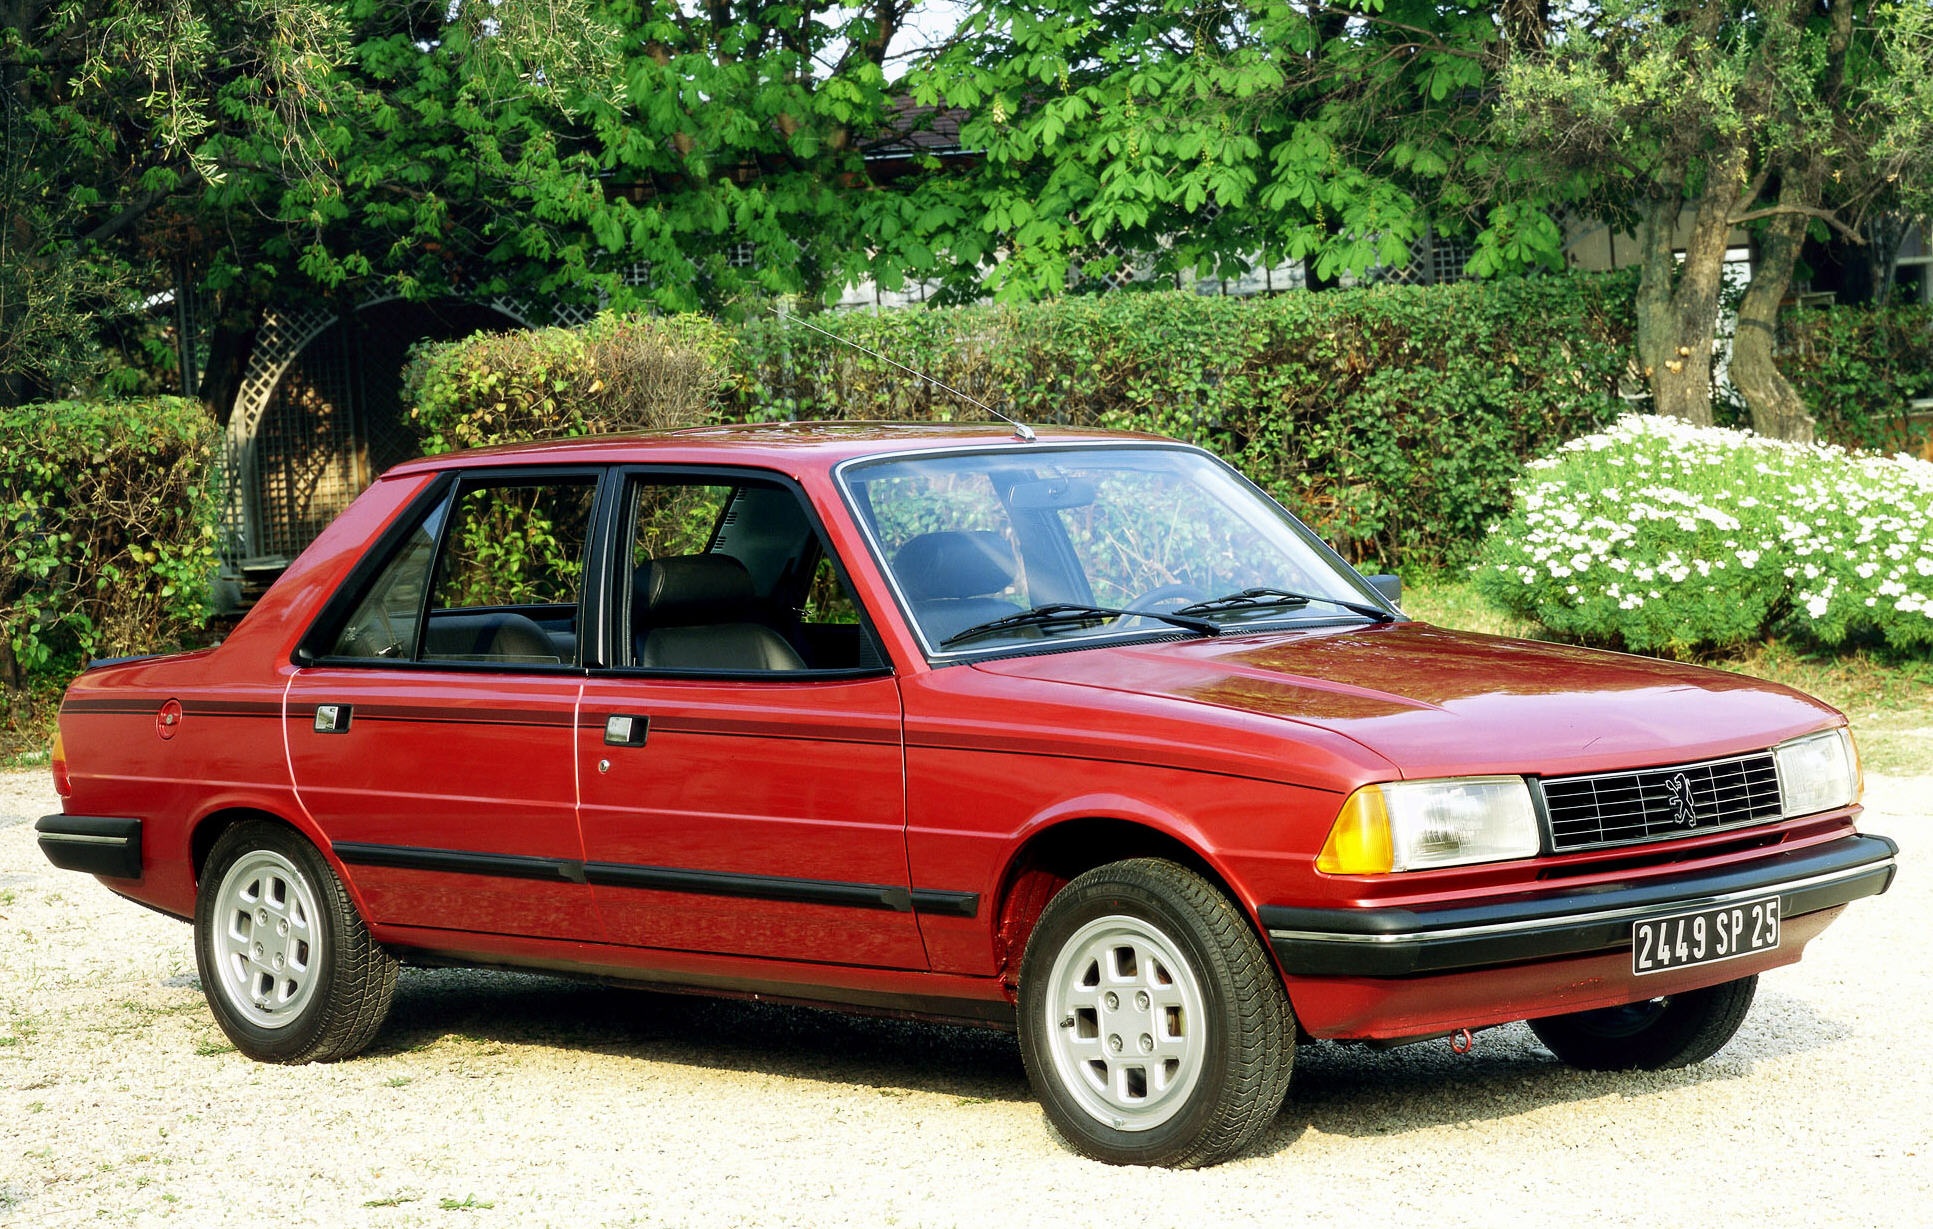 peugeot-305-technical-specifications-and-fuel-economy